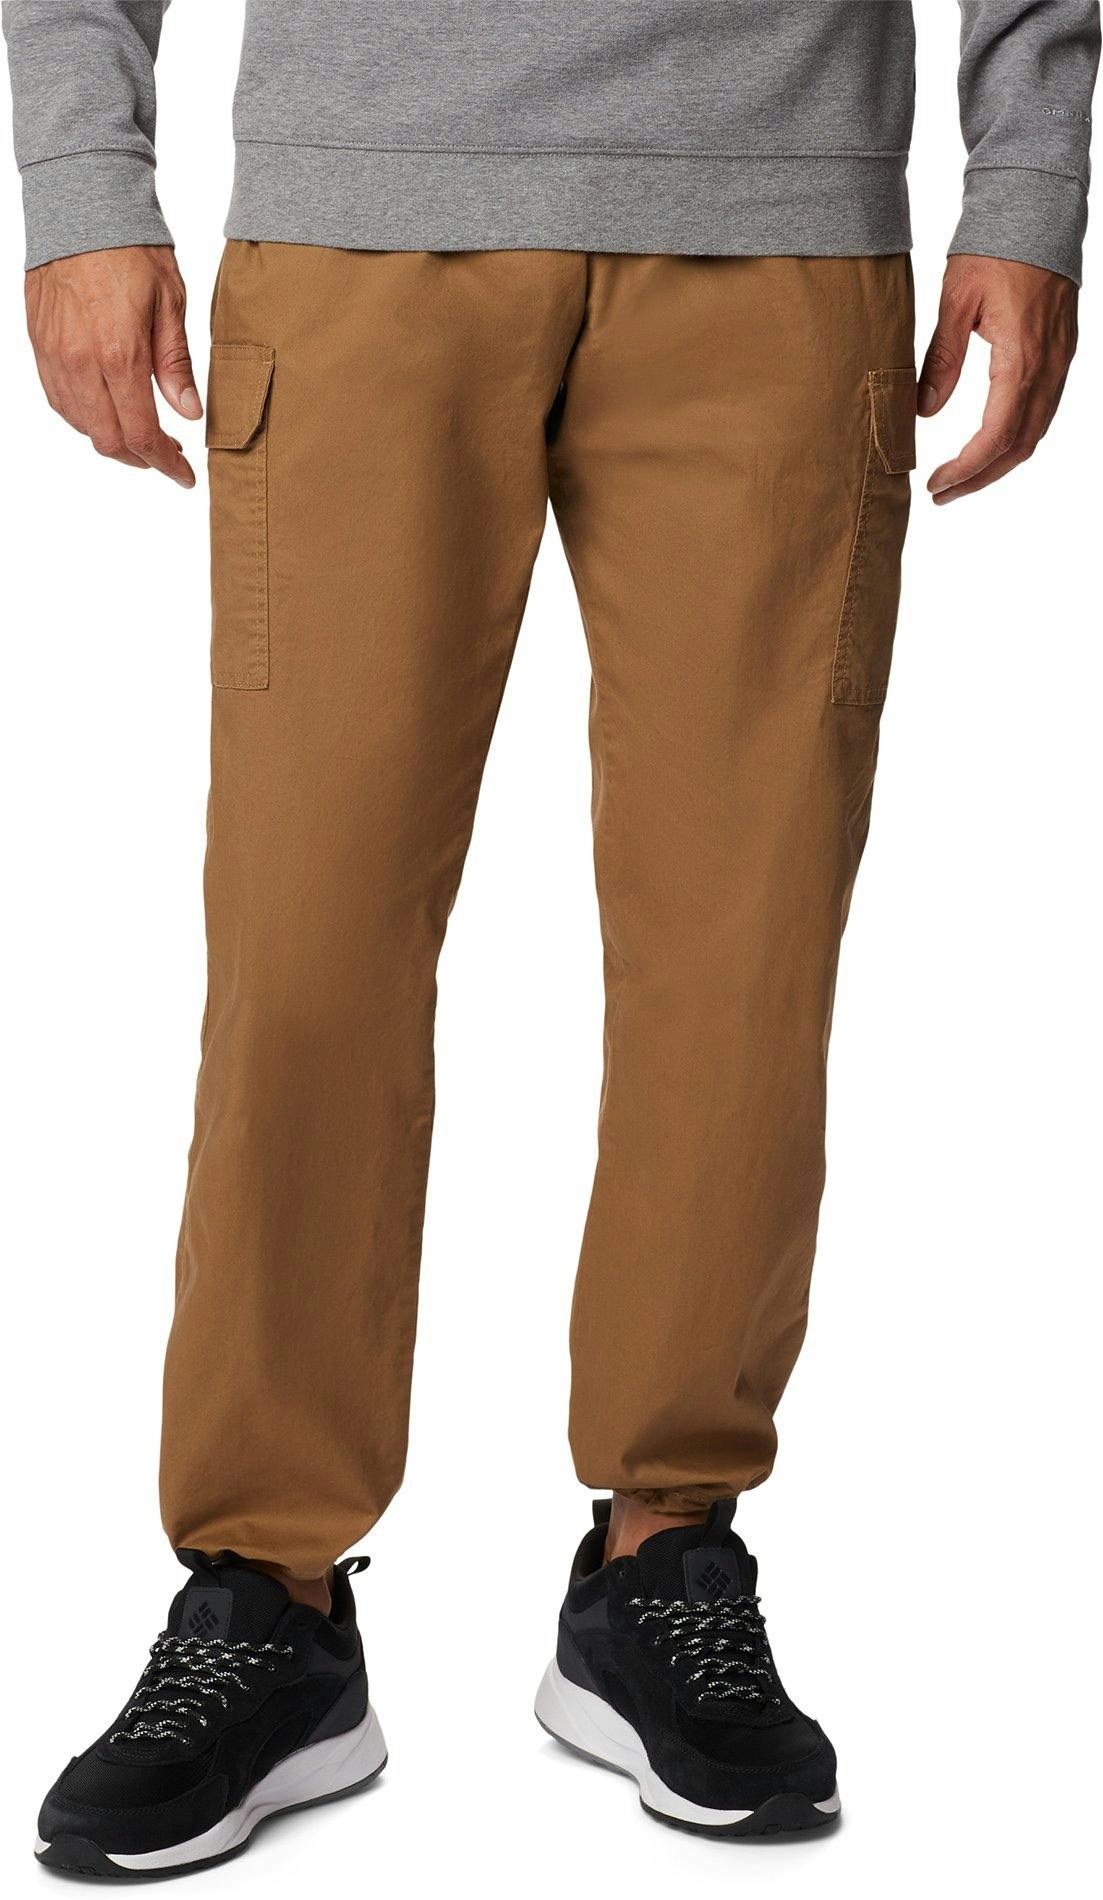 Product image for Rapid Rivers Cargo Pants - Men's